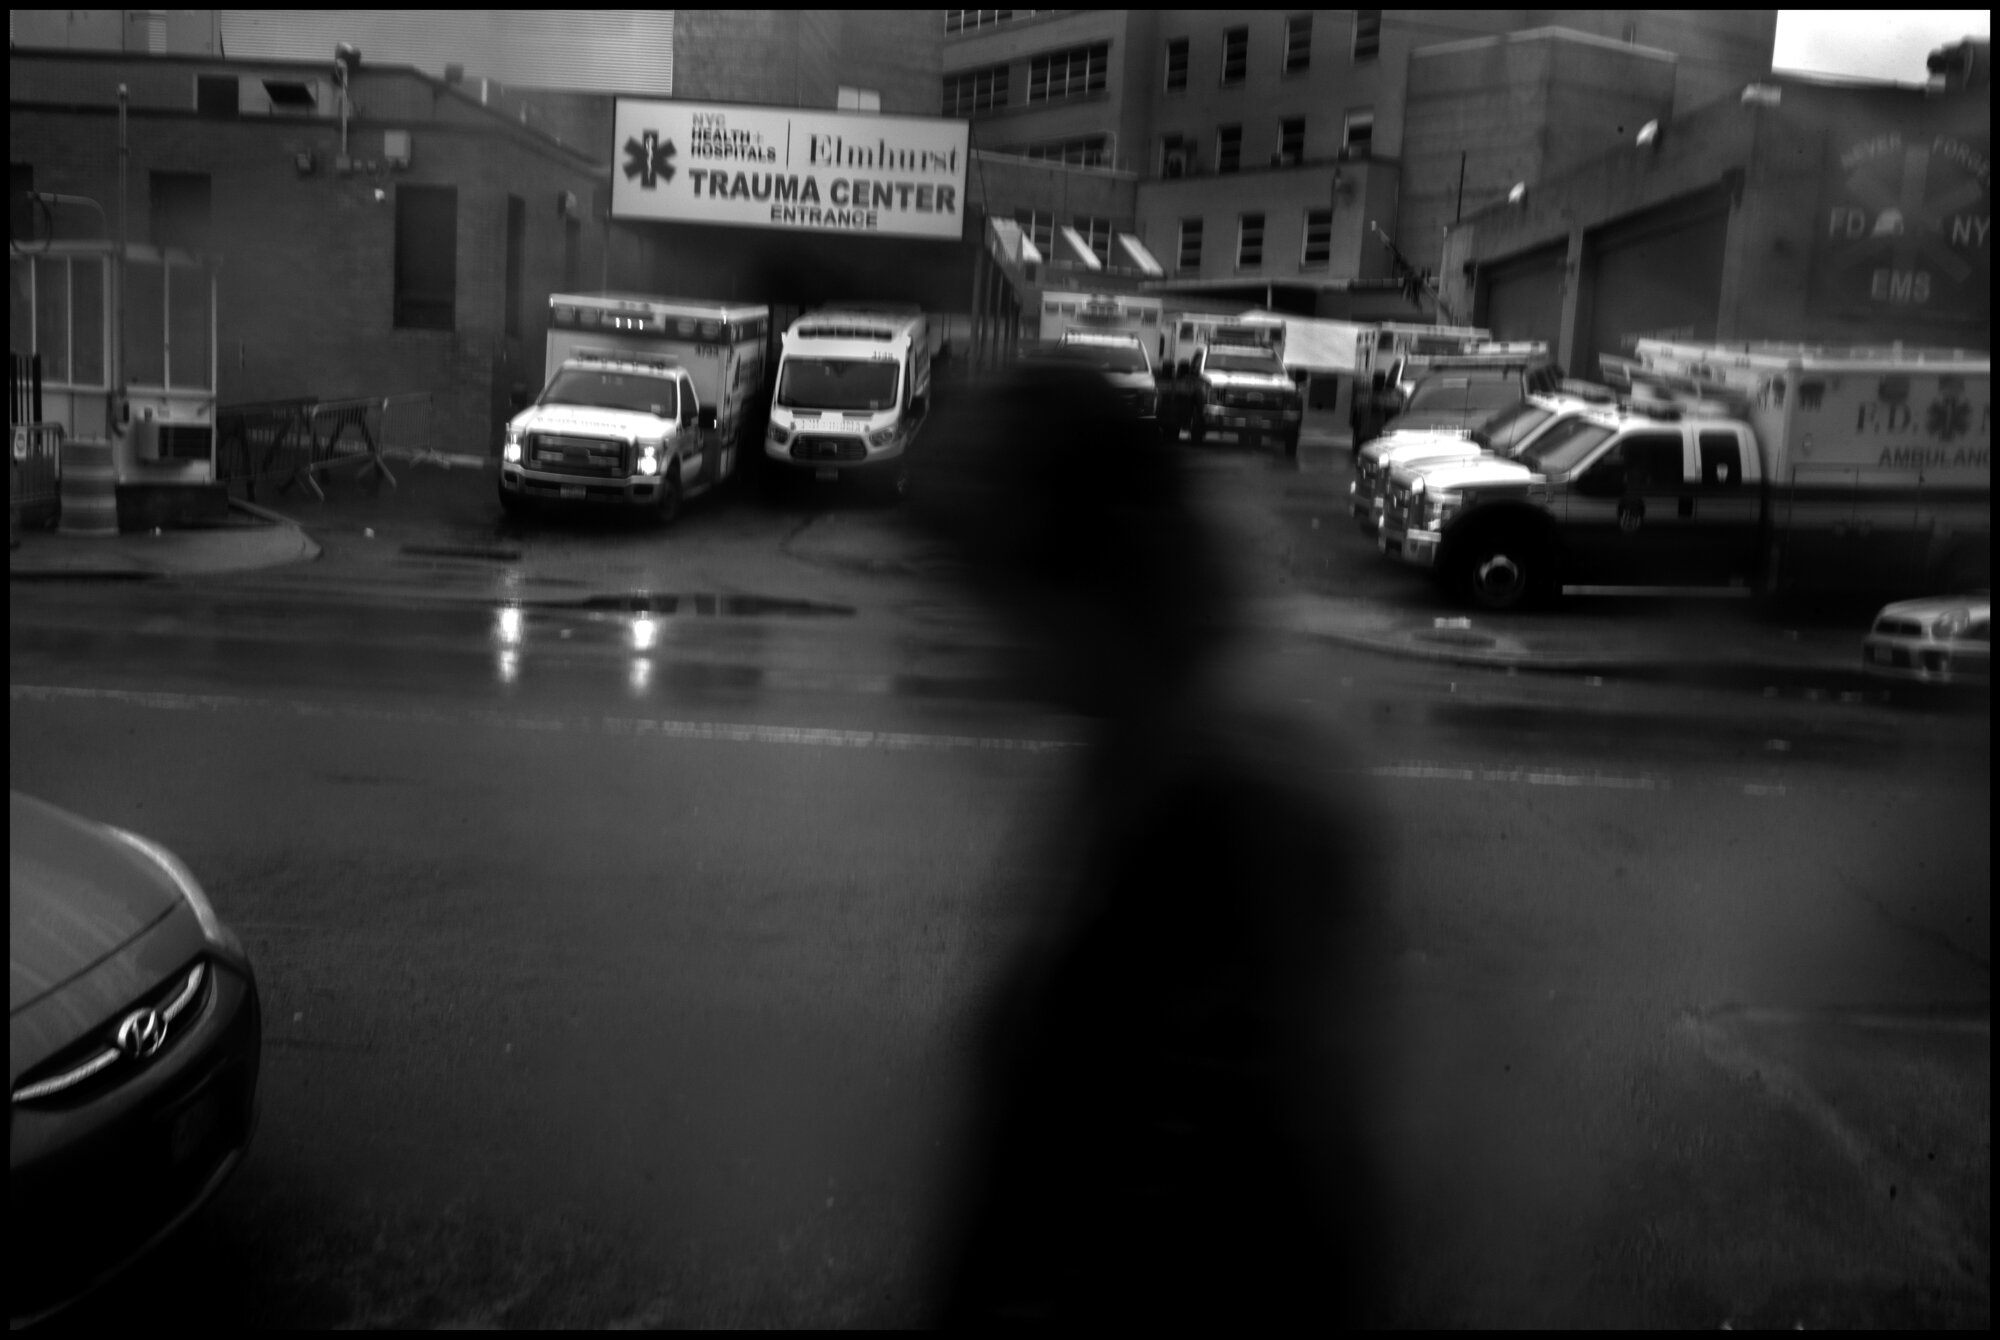  The emergency room of Elmhurst Hospital in Queens.  March 29, 2020. © Peter Turnley  ID# 07-006 